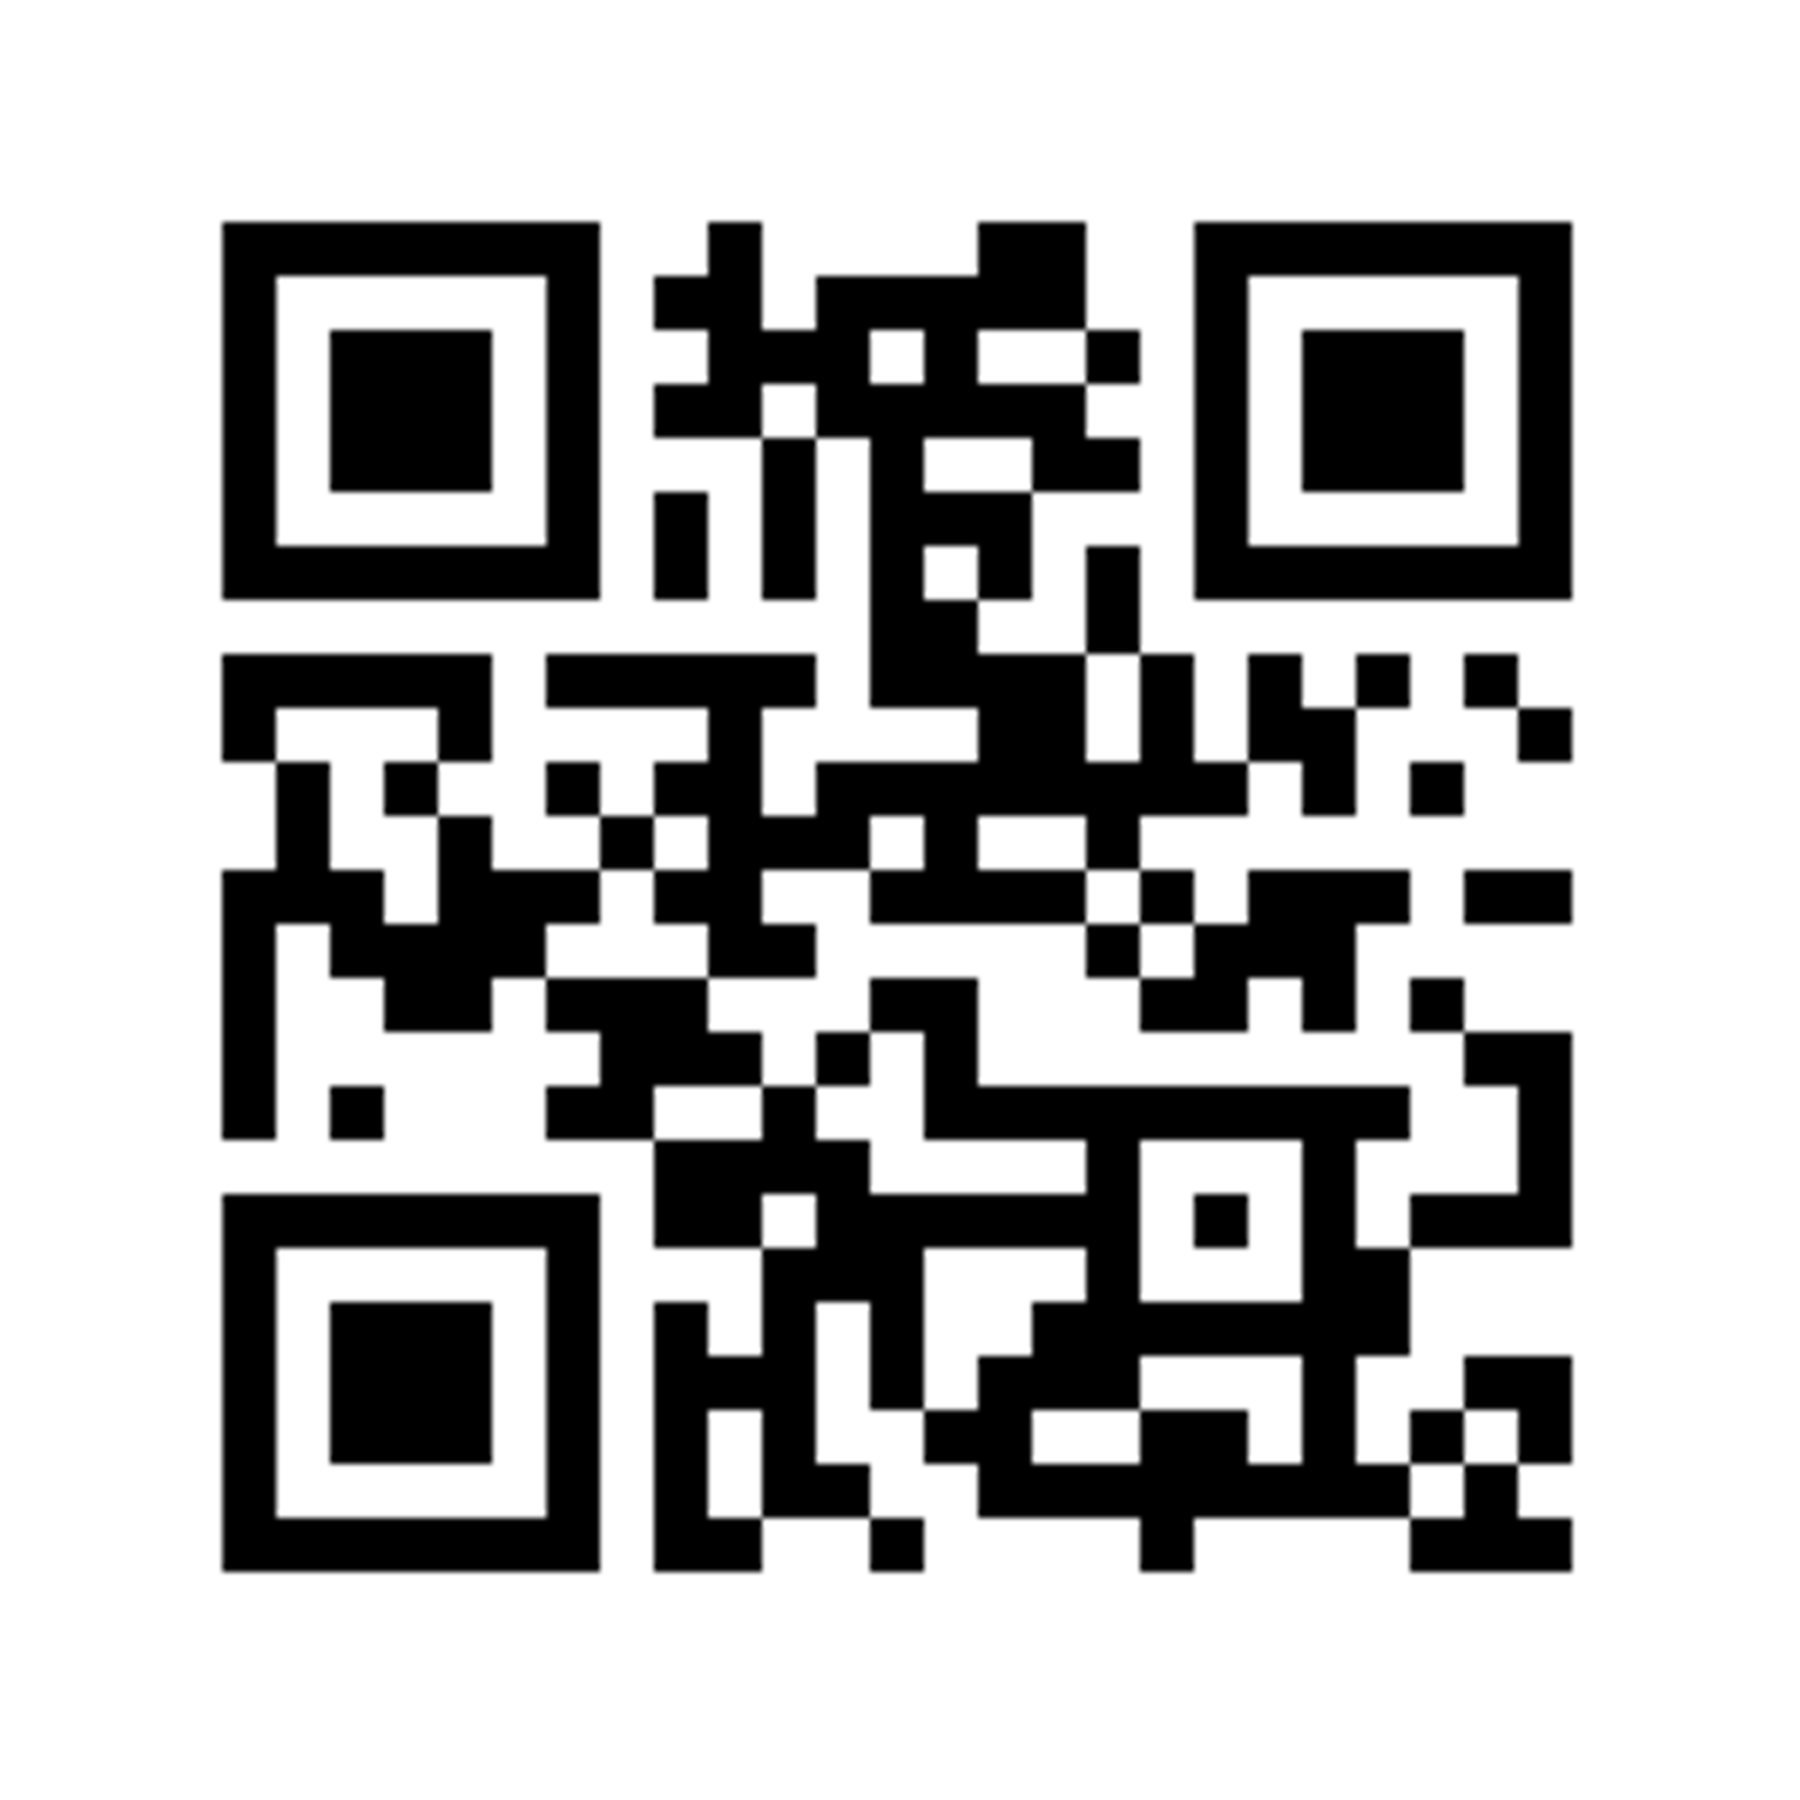 Image of QR code to download Planon app from the store